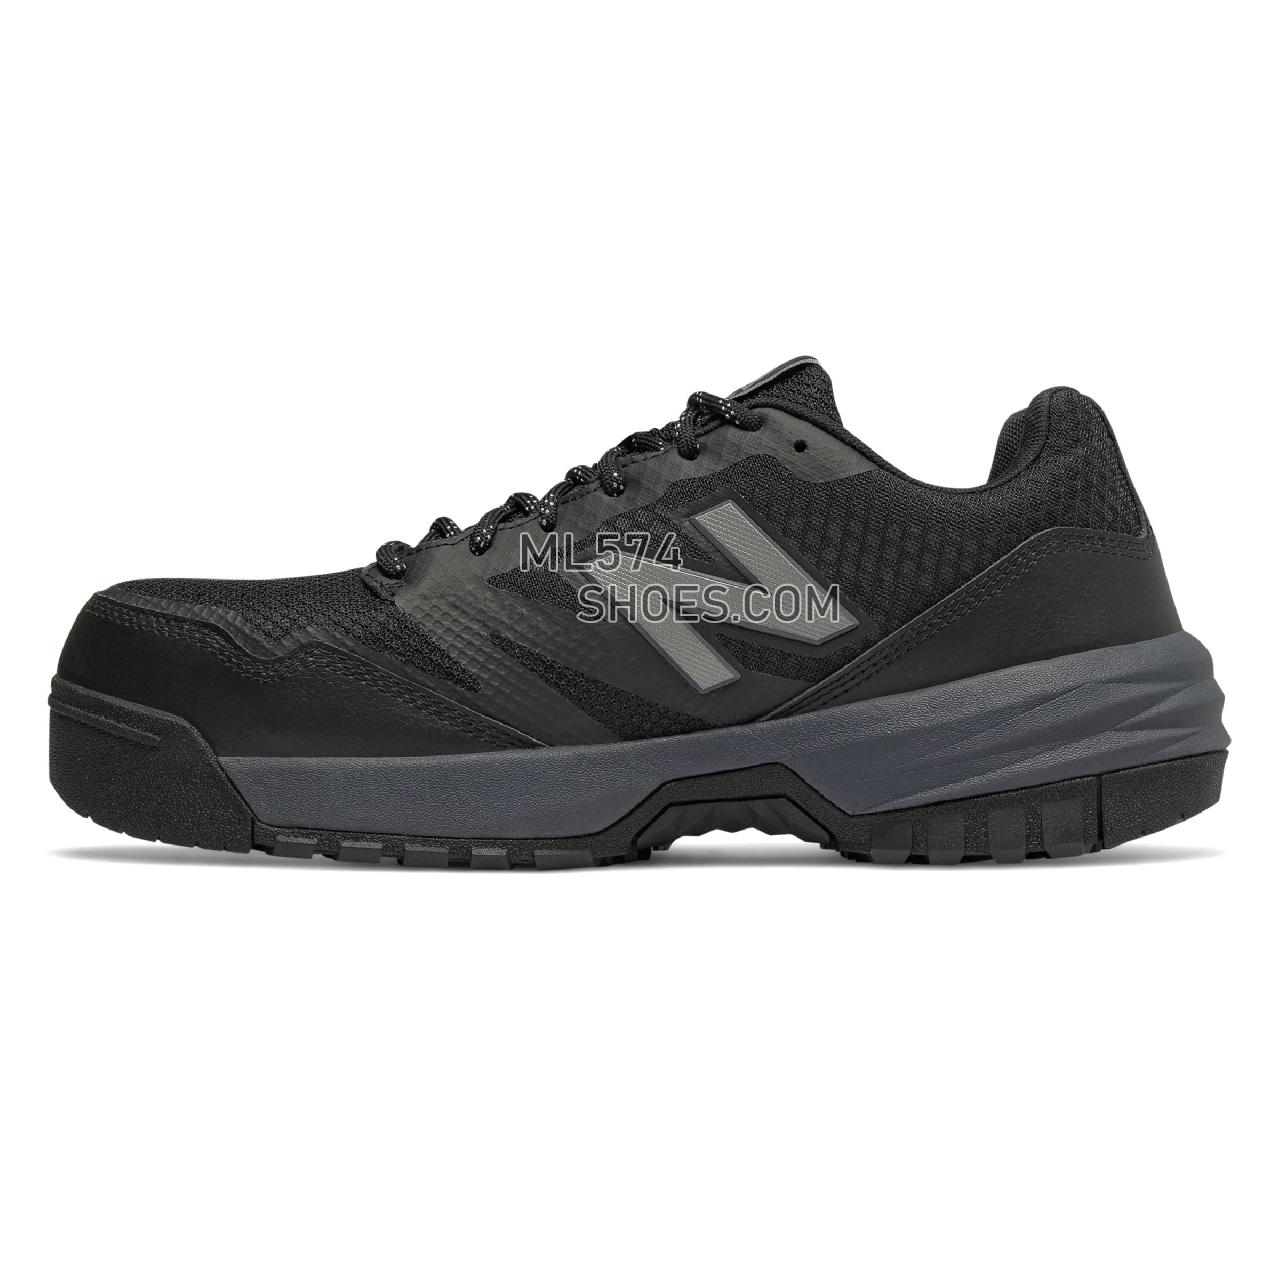 New Balance Composite Toe 589 - Men's 589 - Industrial Black with Grey - MID589G1